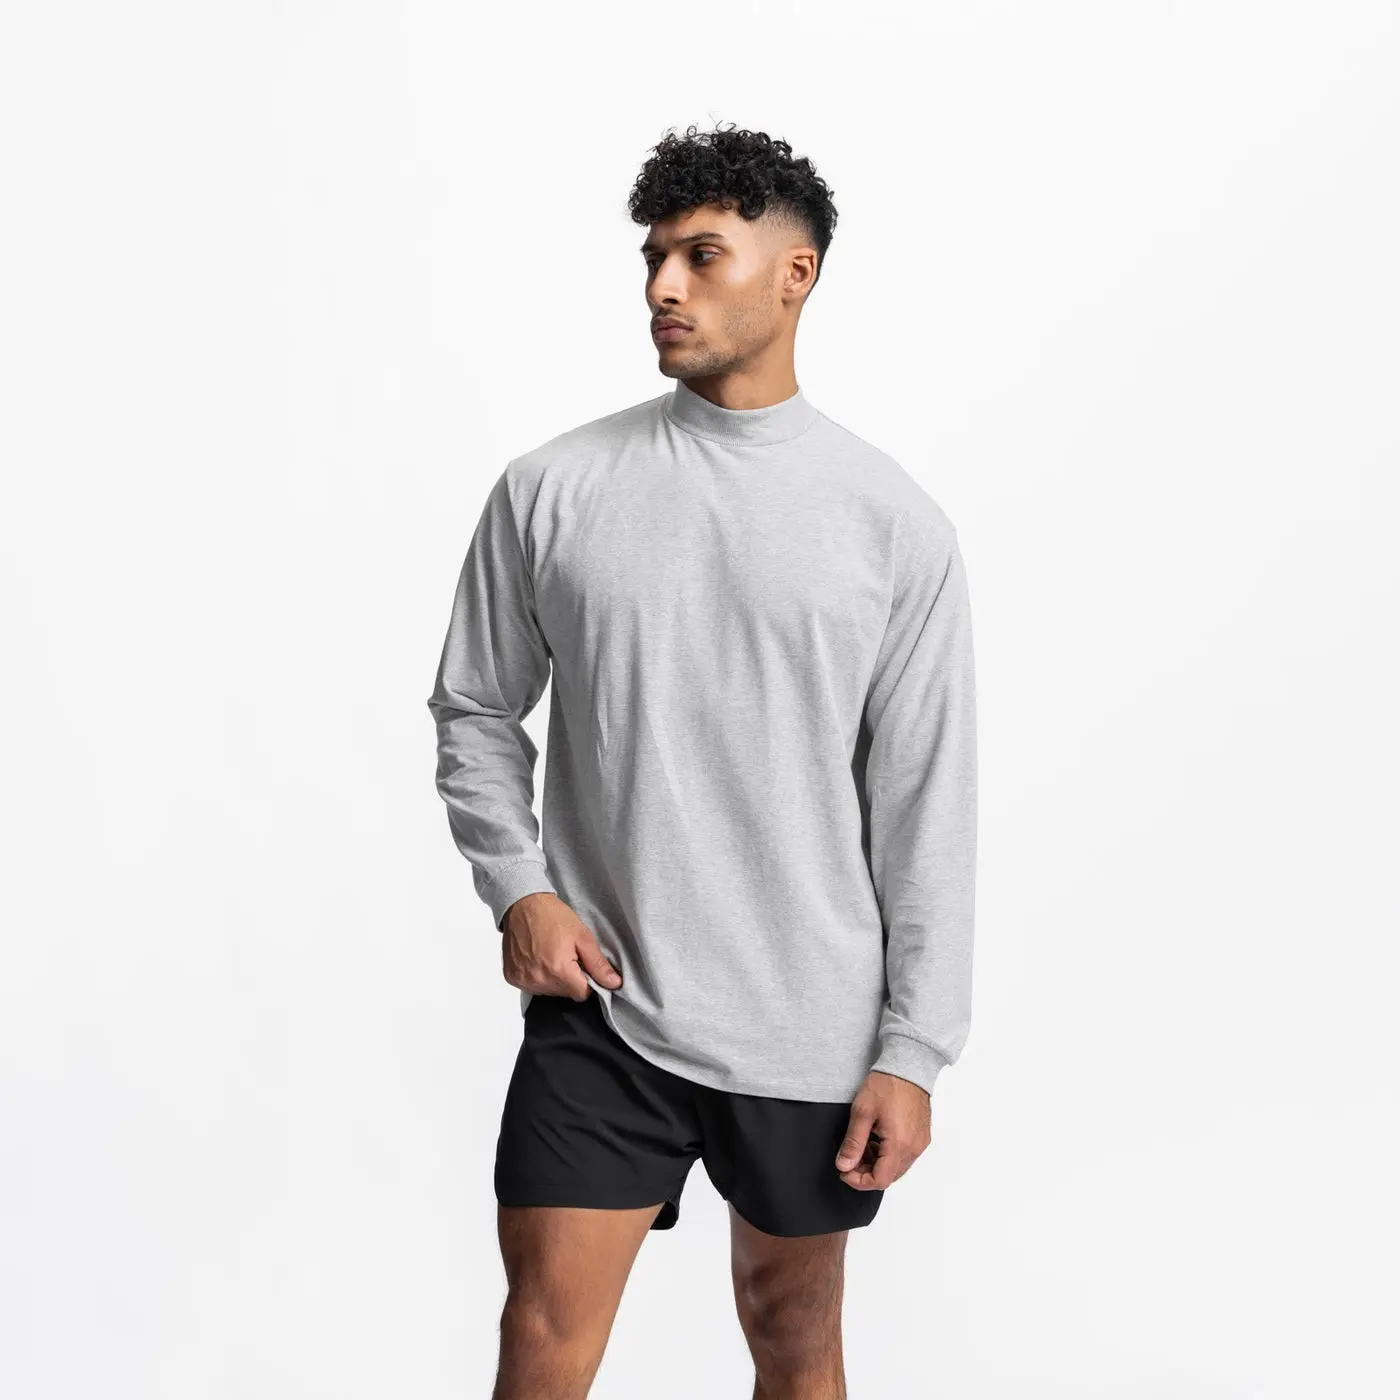 New Customized Sports Long-sleeved T-shirt Men's Small Neckline Loose Fitness Leisure High-neck Solid Color Terry Shirts